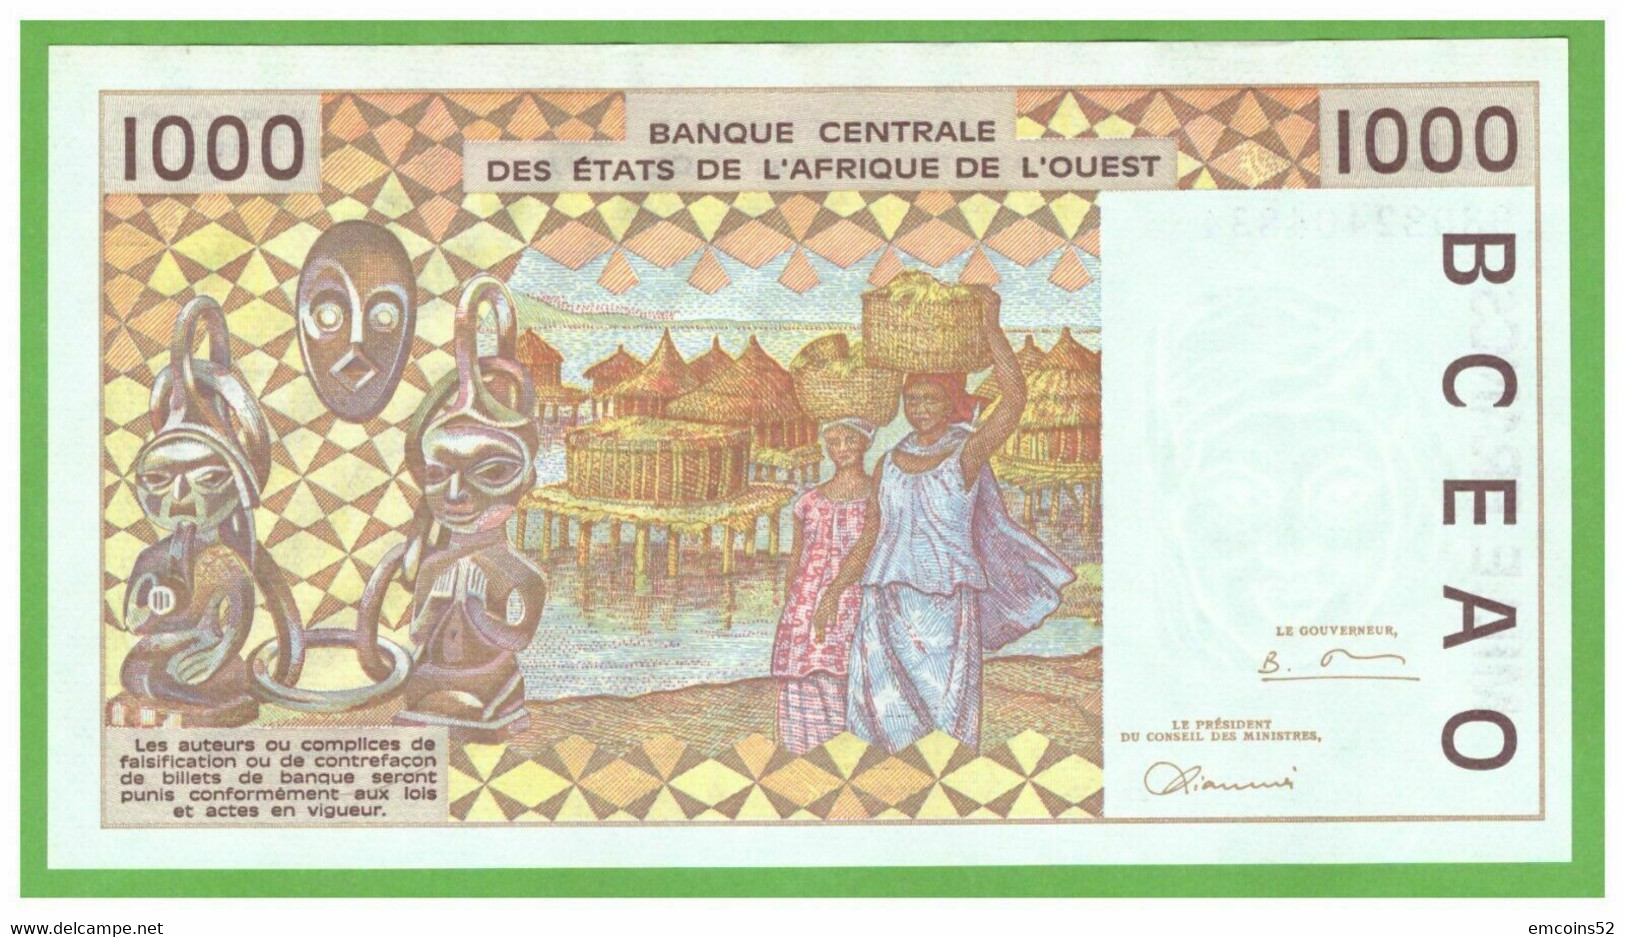 IVORY COAST W.A.S. 1000 FRANCS 1998  P-111Ag UNC - Stati Dell'Africa Occidentale